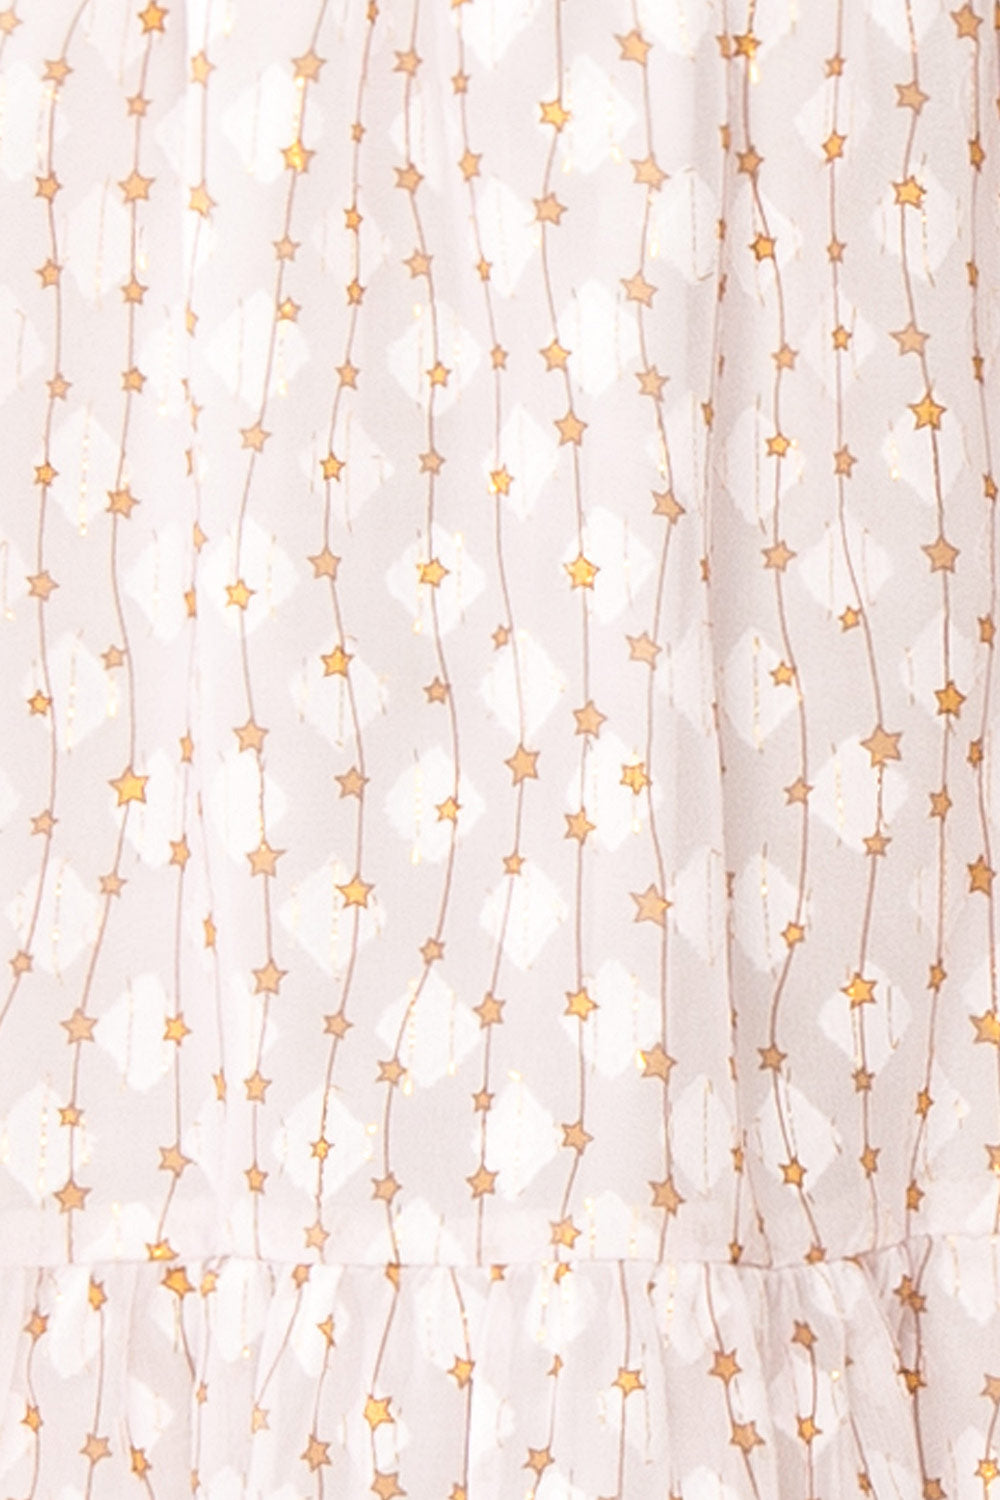 Jean Short Star Patterned Dress | Boutique 1861 fabric 